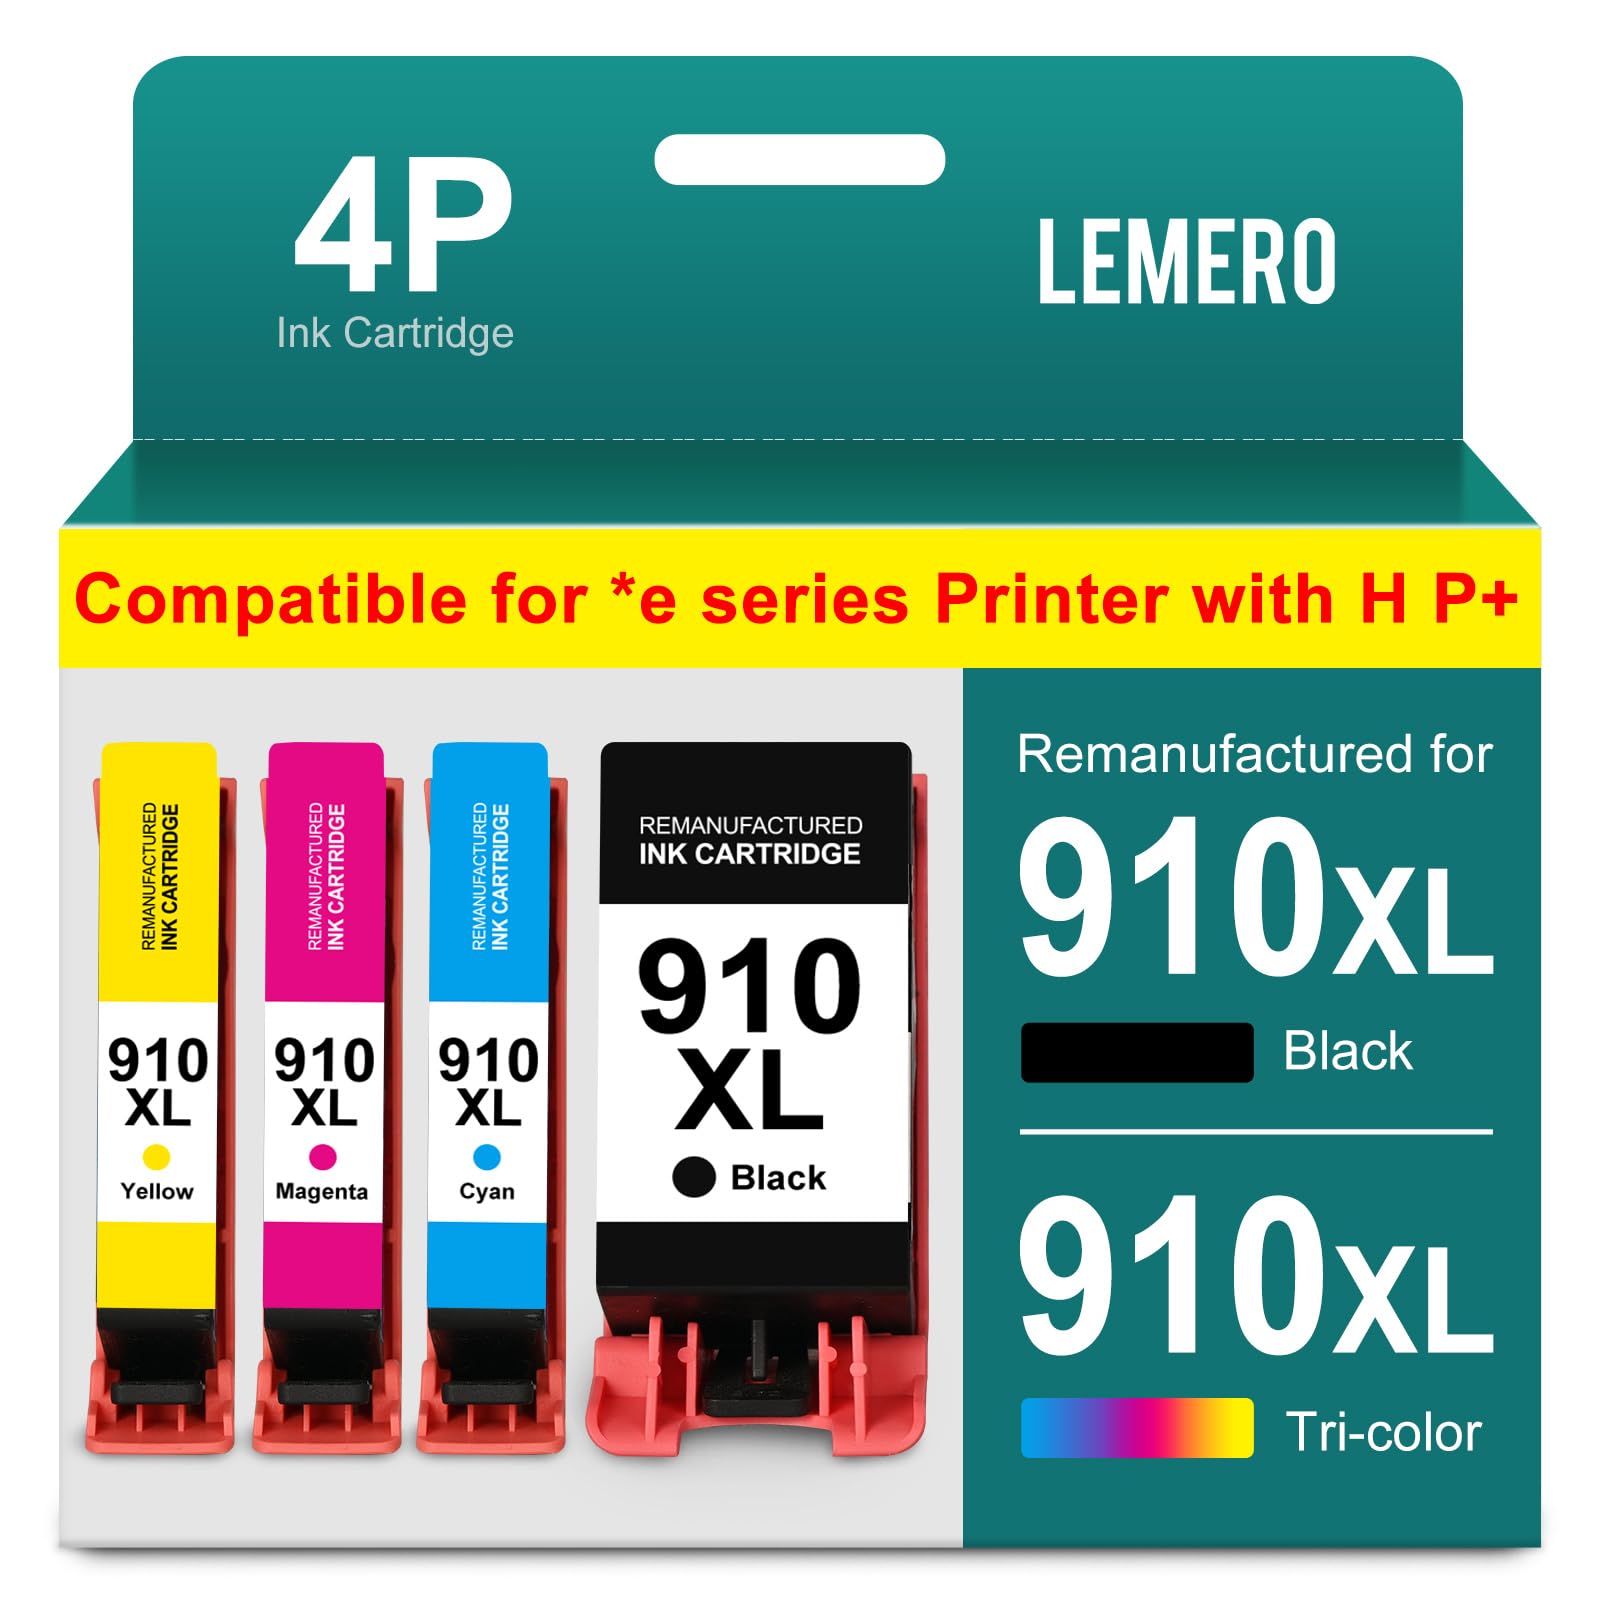 LEMERO 910XL ink cartridge pack compatible with e series printers with HP+ service